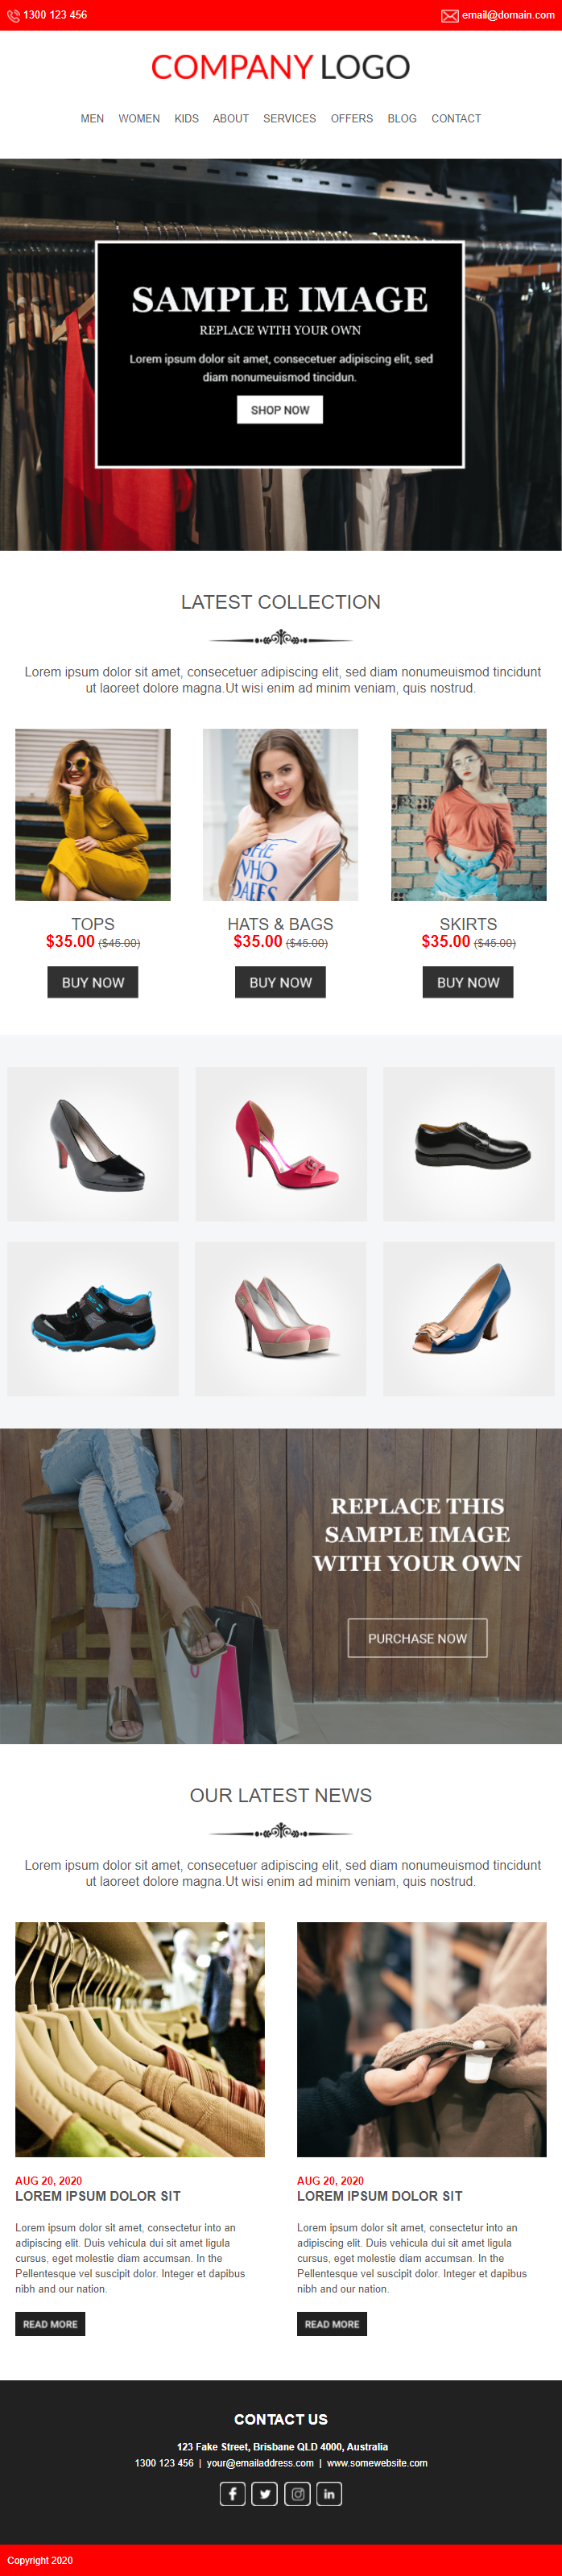 Ecommerce Email Template #3